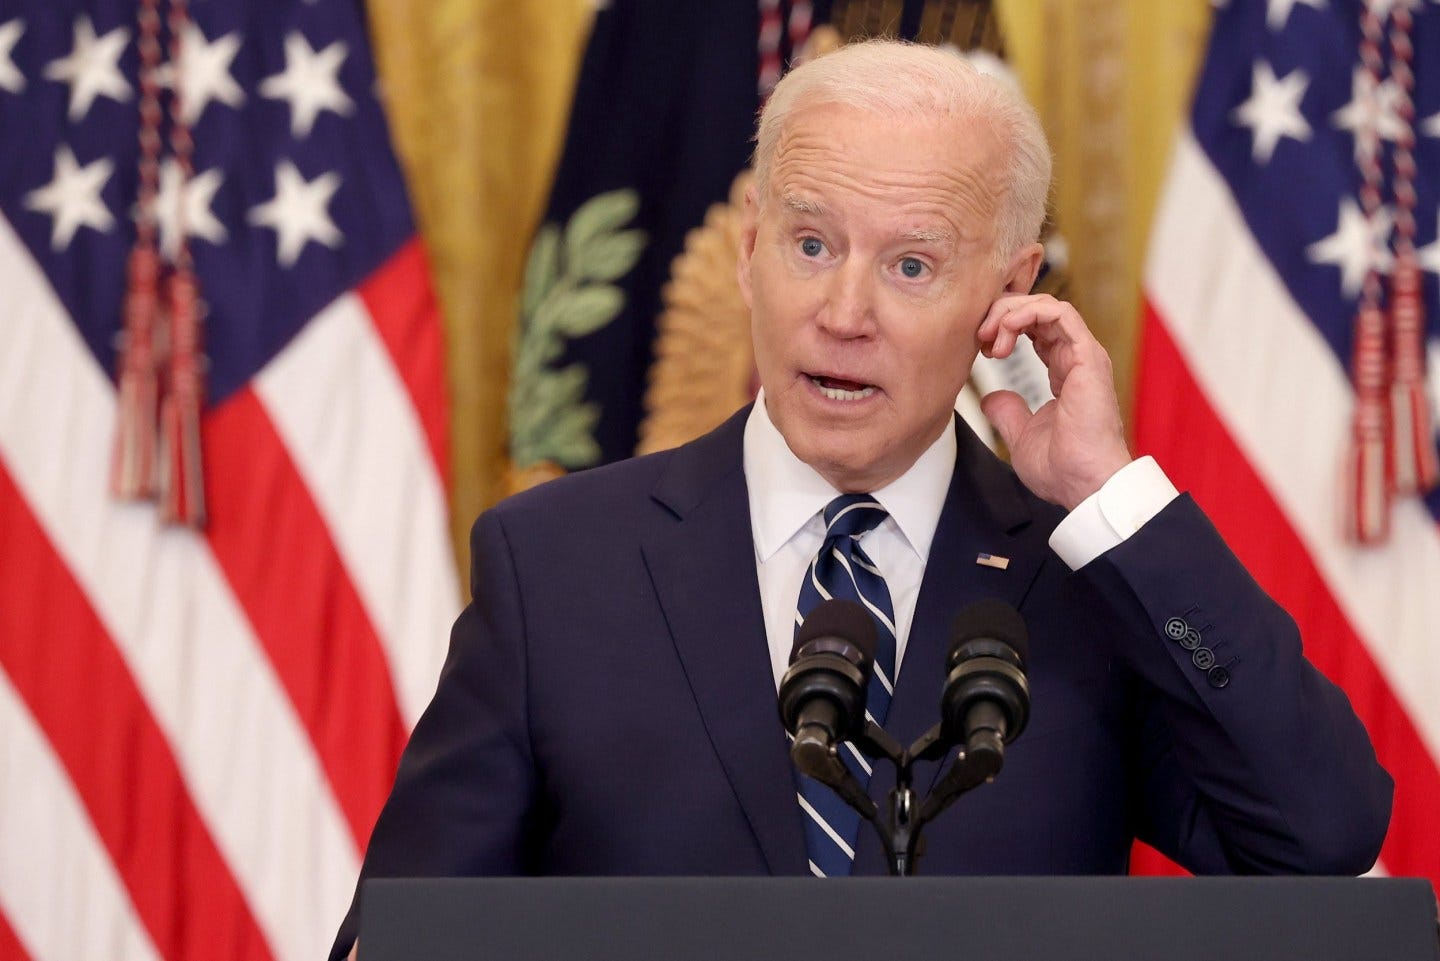 Biden completely forgets what he's talking about and mumbles incoherently at camera in ...